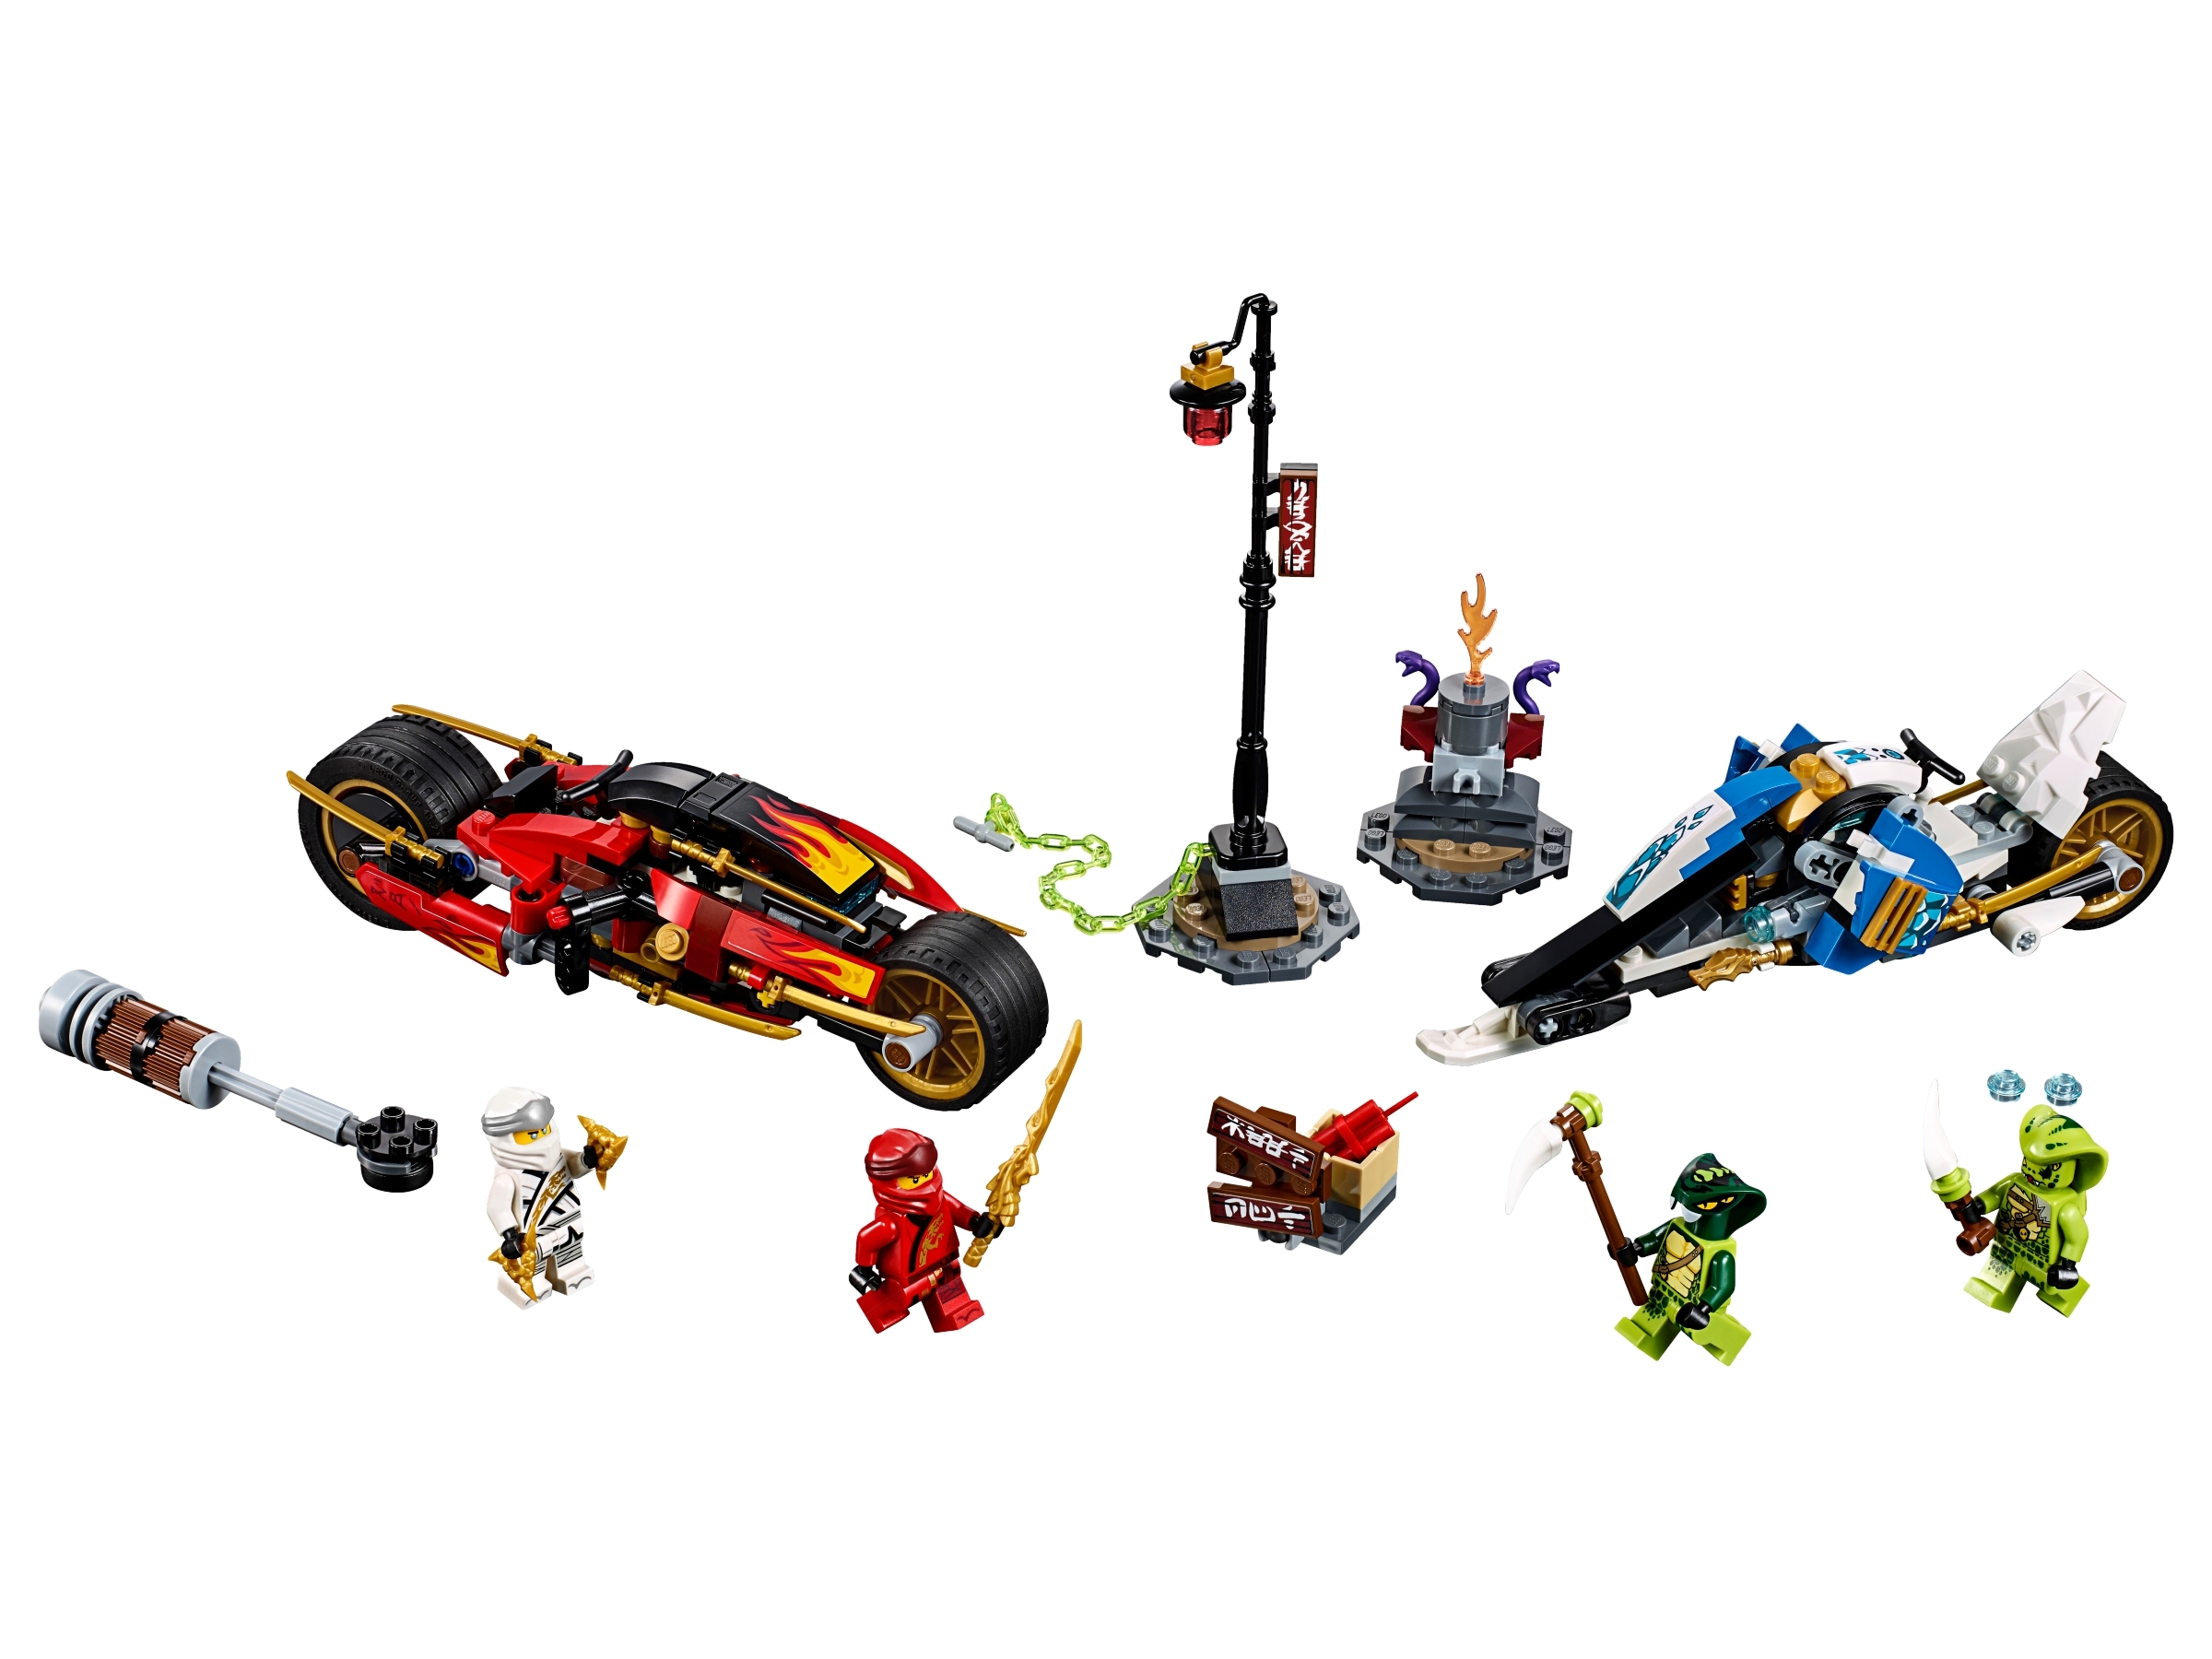 Kai's Blade Cycle & Zane's Snowmobile 70667 | NINJAGO® Buy online at the Official LEGO® Shop US